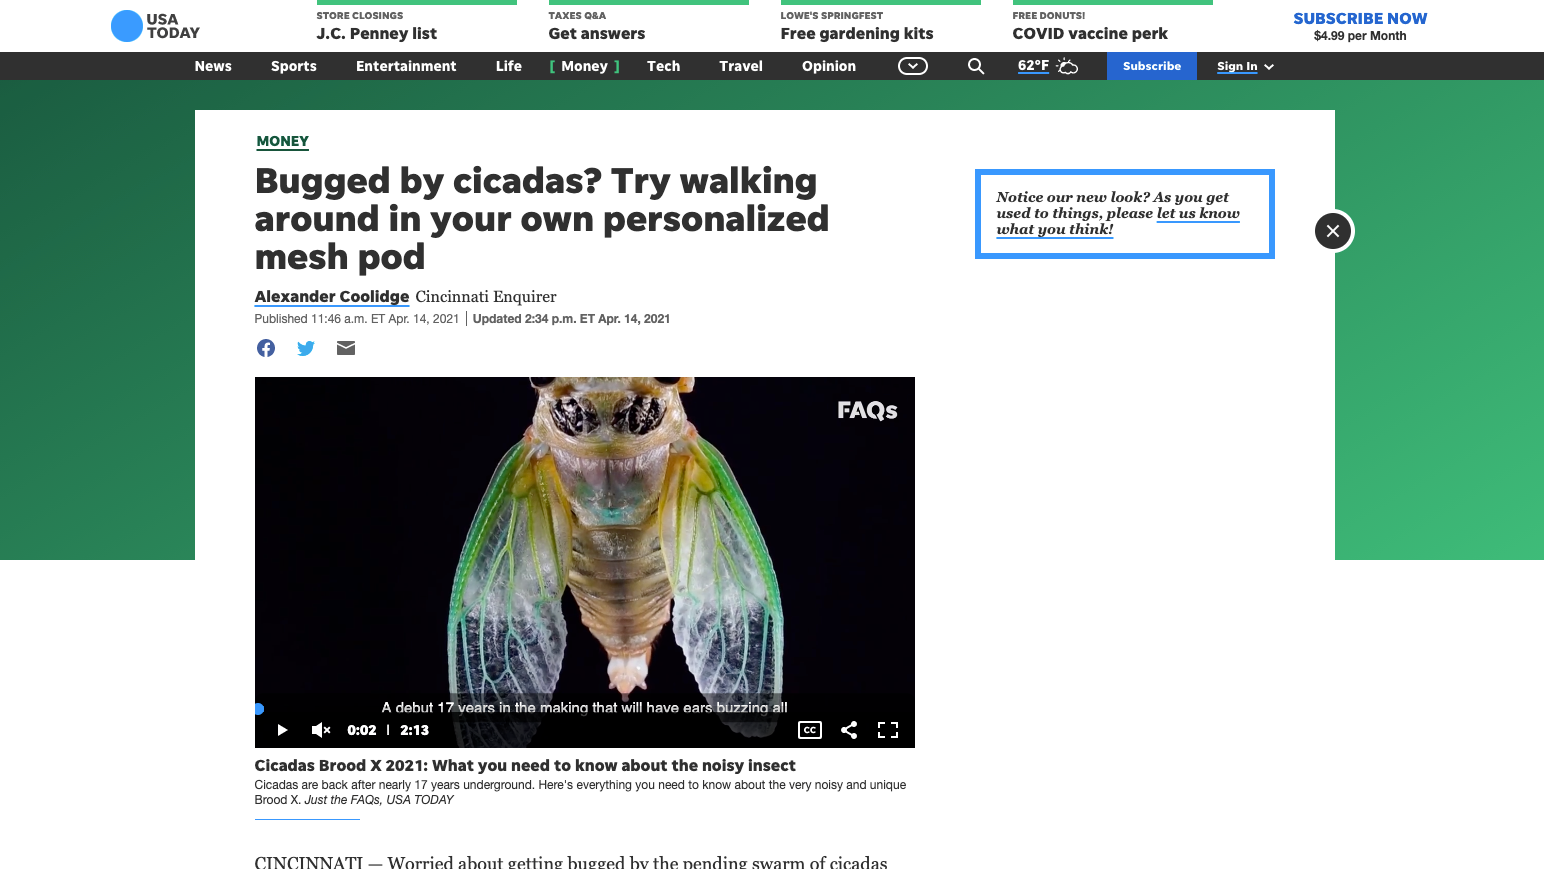 USA TODAY: Bugged by cicadas? Try walking around in your own personalized mesh pod